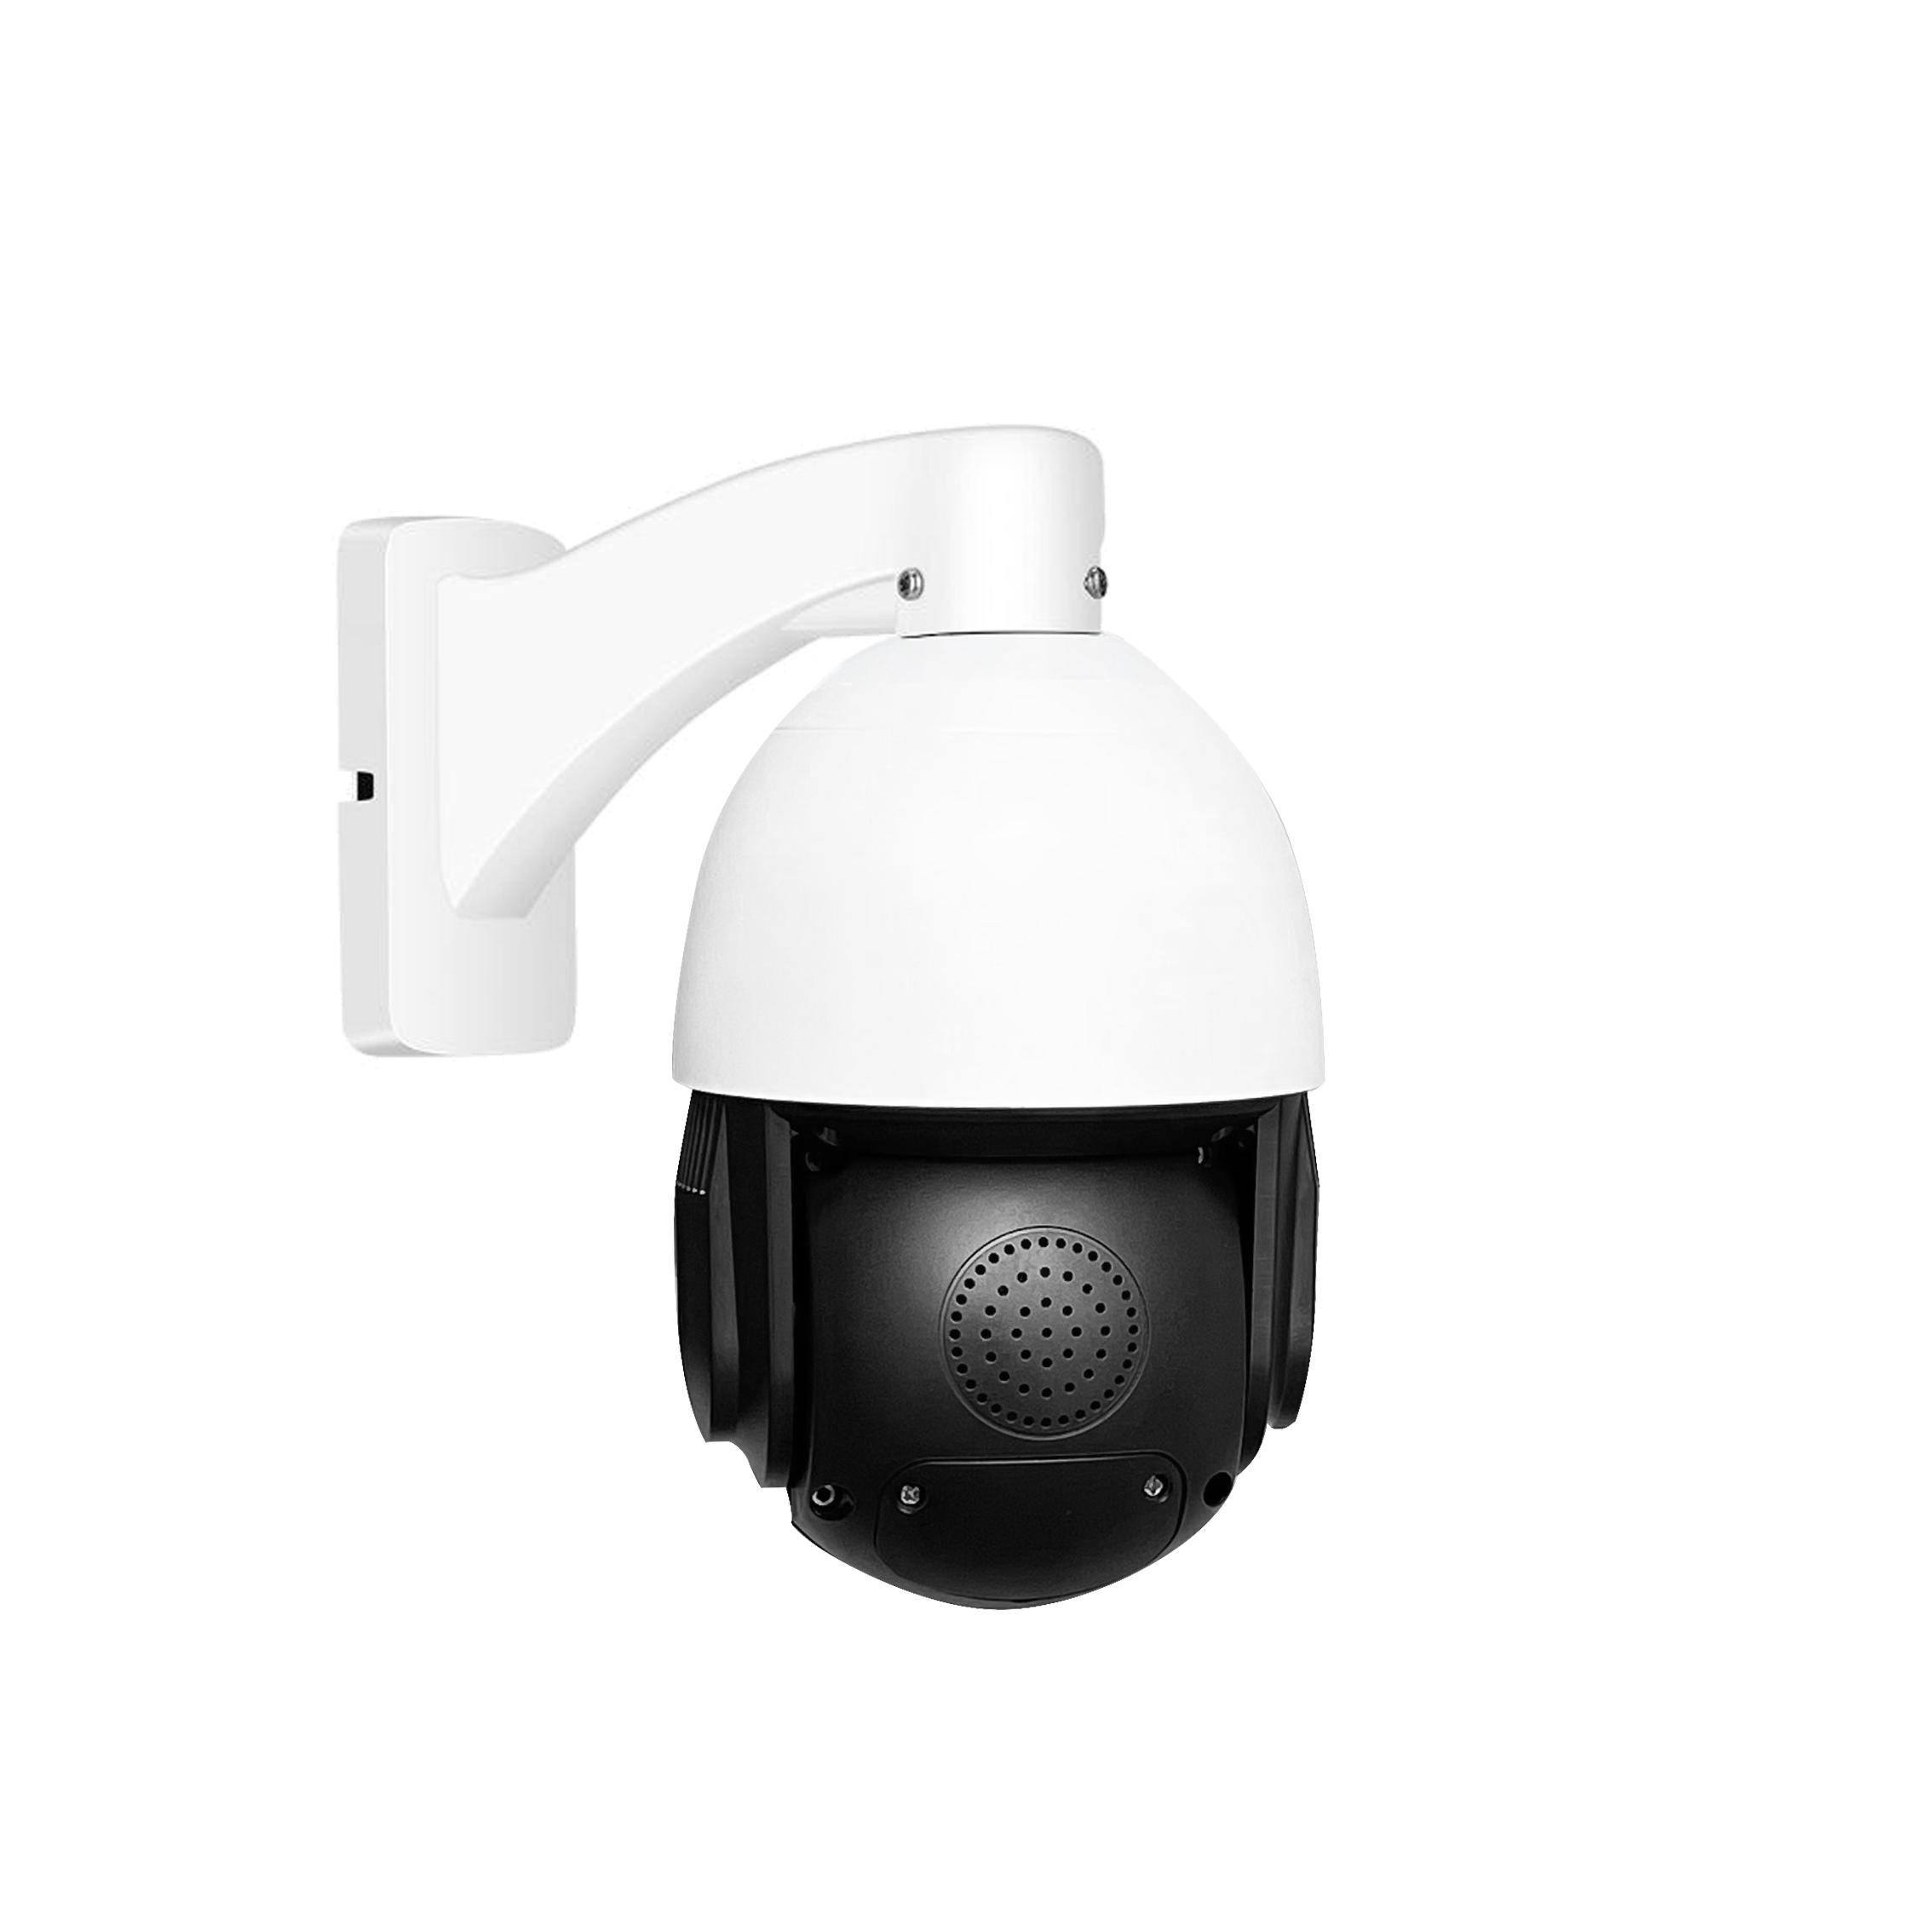 Microseven Ultra HD 6MP (3072x2048) Full Color Night Vision PoE+ Indoor / Outdoor 20X Optical Zoom Pan Tilt Speed Dome (PTZ) IP Network Camera with Human & Vehicle Motion Detection & Auto Tracking, WDR, DNR, IP66 Waterproof, Built-in 256GB SD card Slot, Two-Way Audio, Auto Cruise, Web GUI & Apps, VMS (Video Management System),  Cloud Storage and Broadcasting on YouTube & Microseven